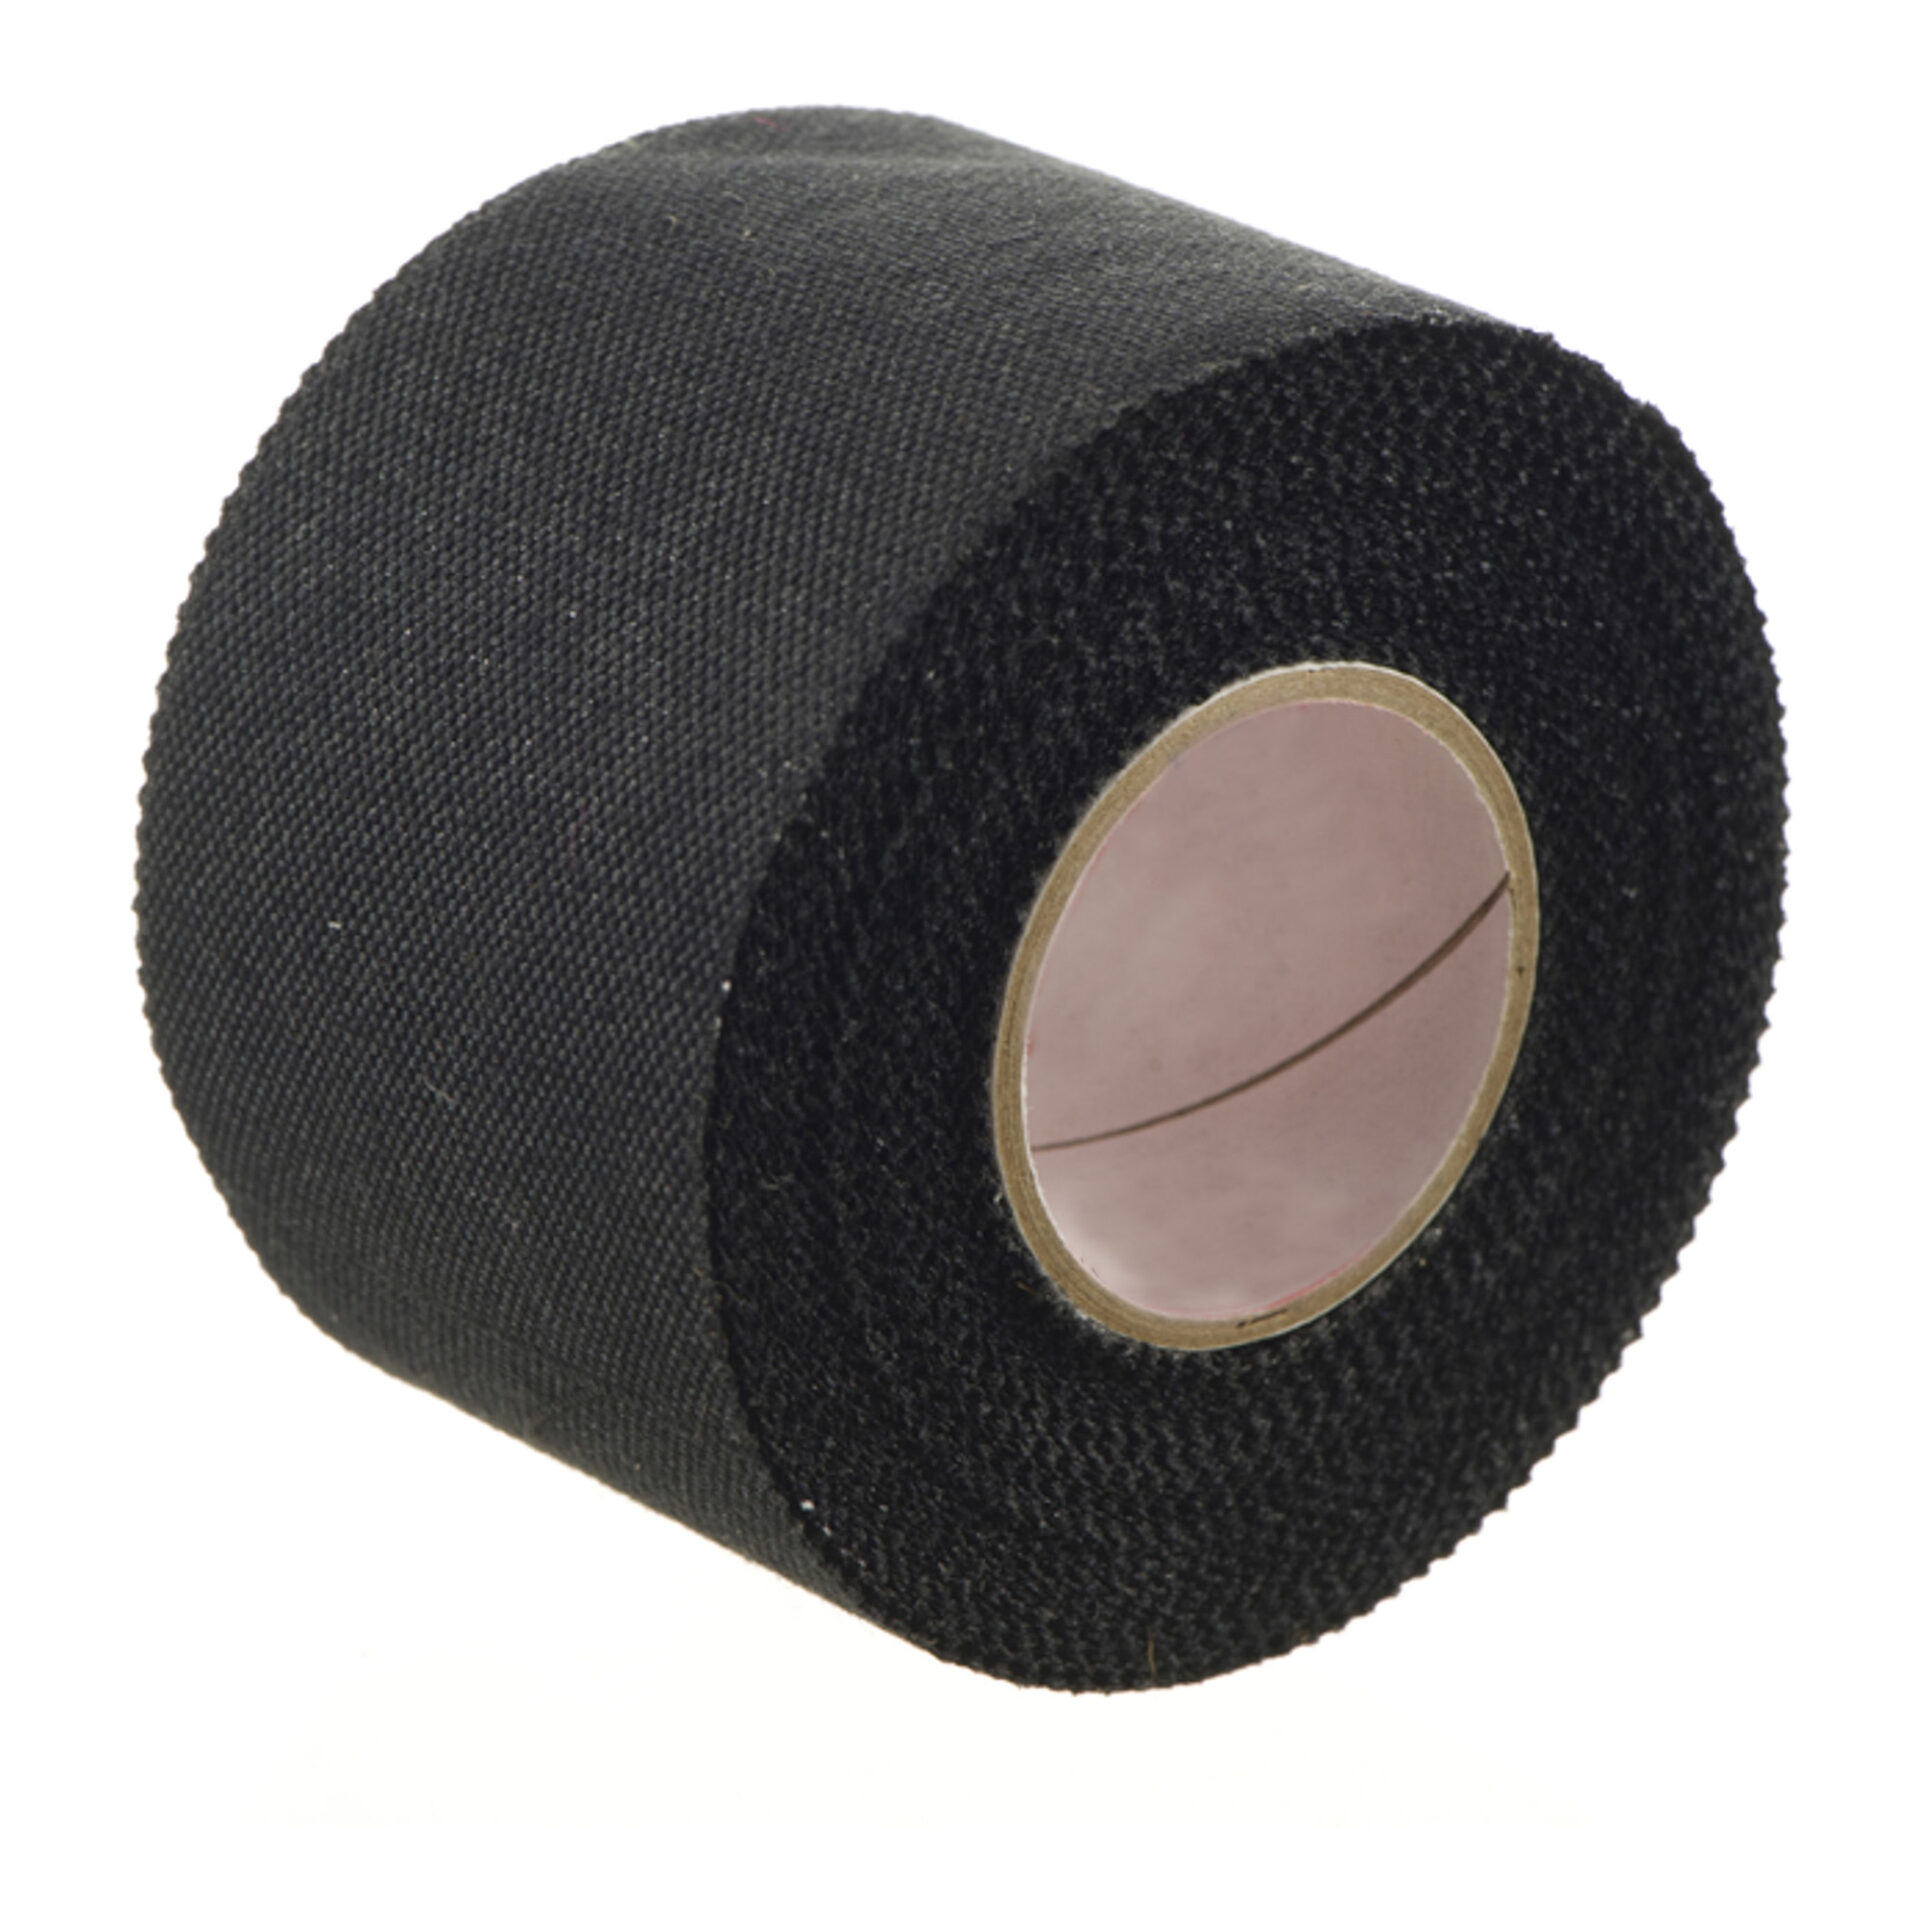 Black Hockey Tape 25mmx25m For Wholesale